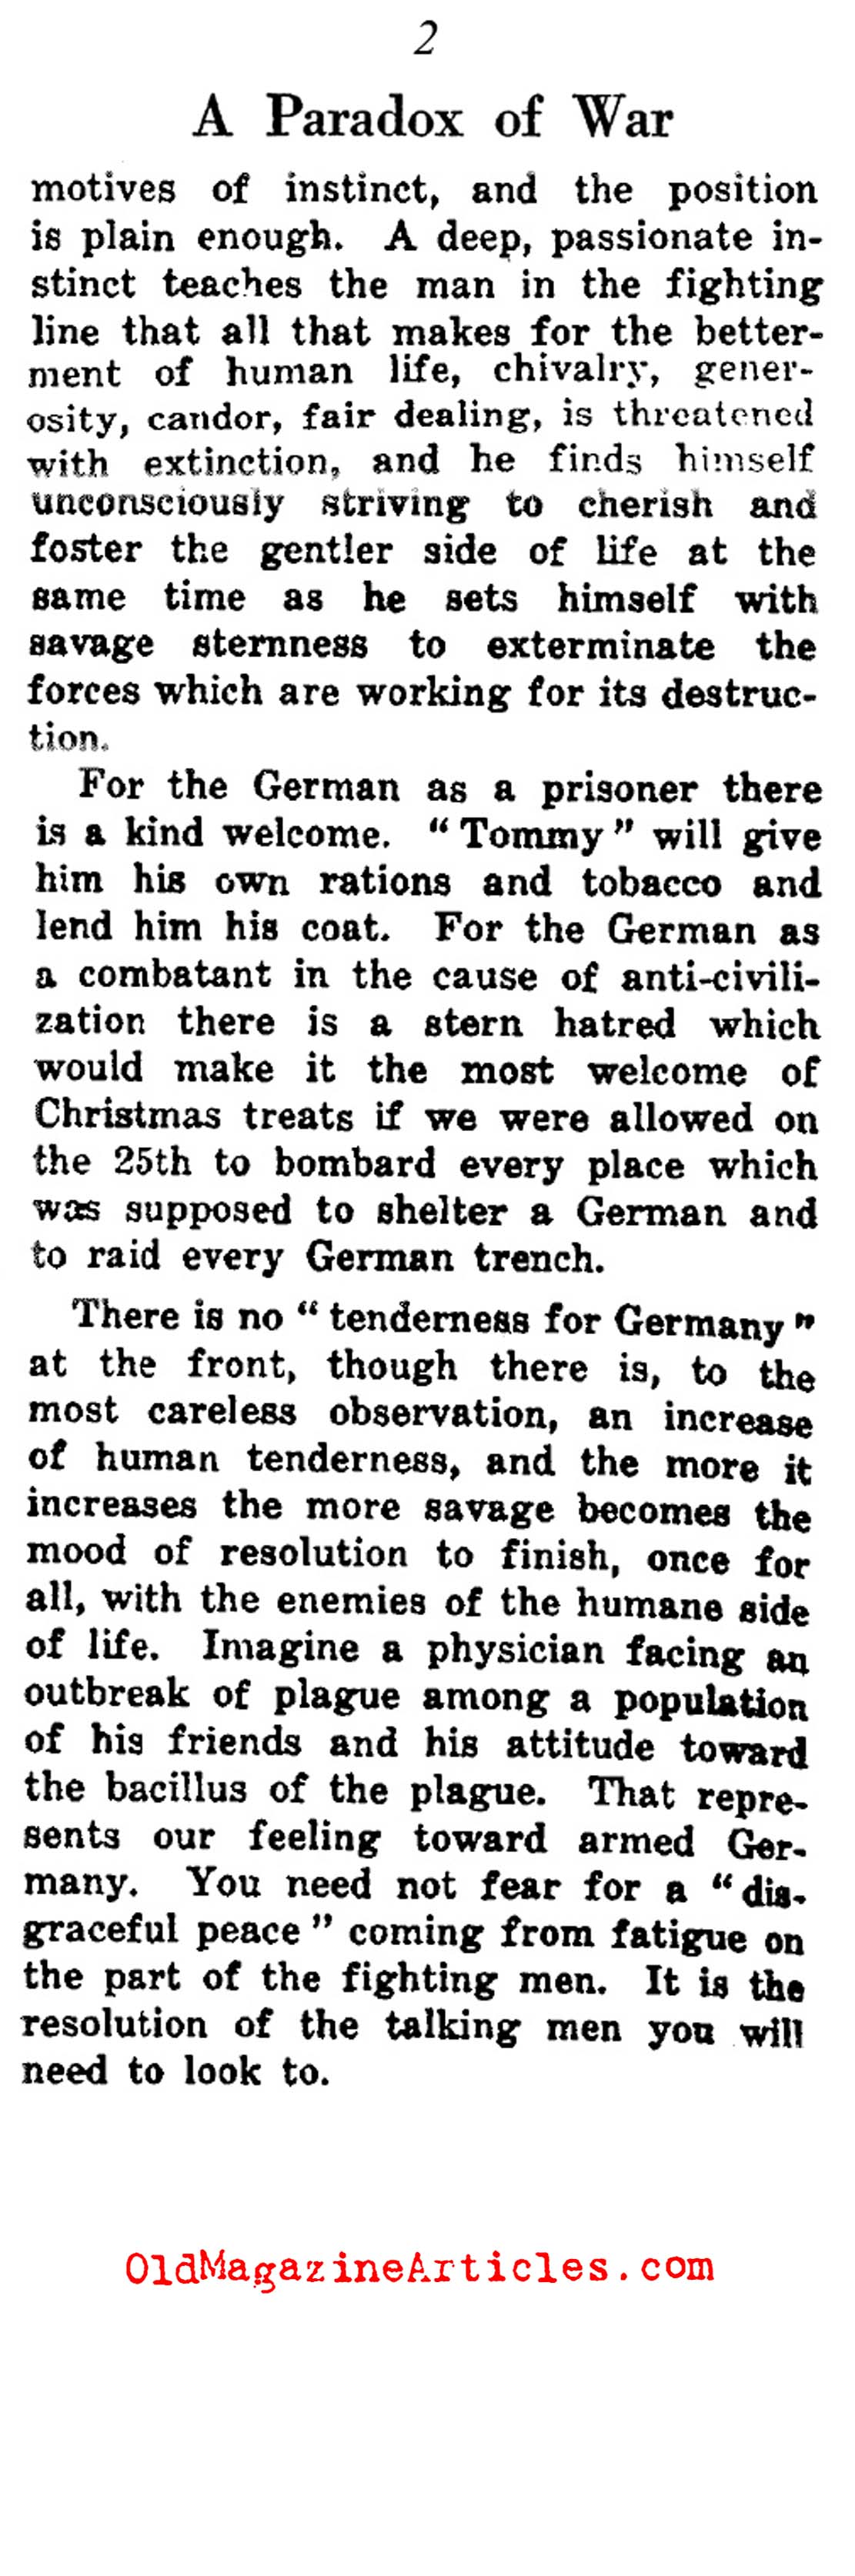 The Effects of War on Character (NY Times, 1915)